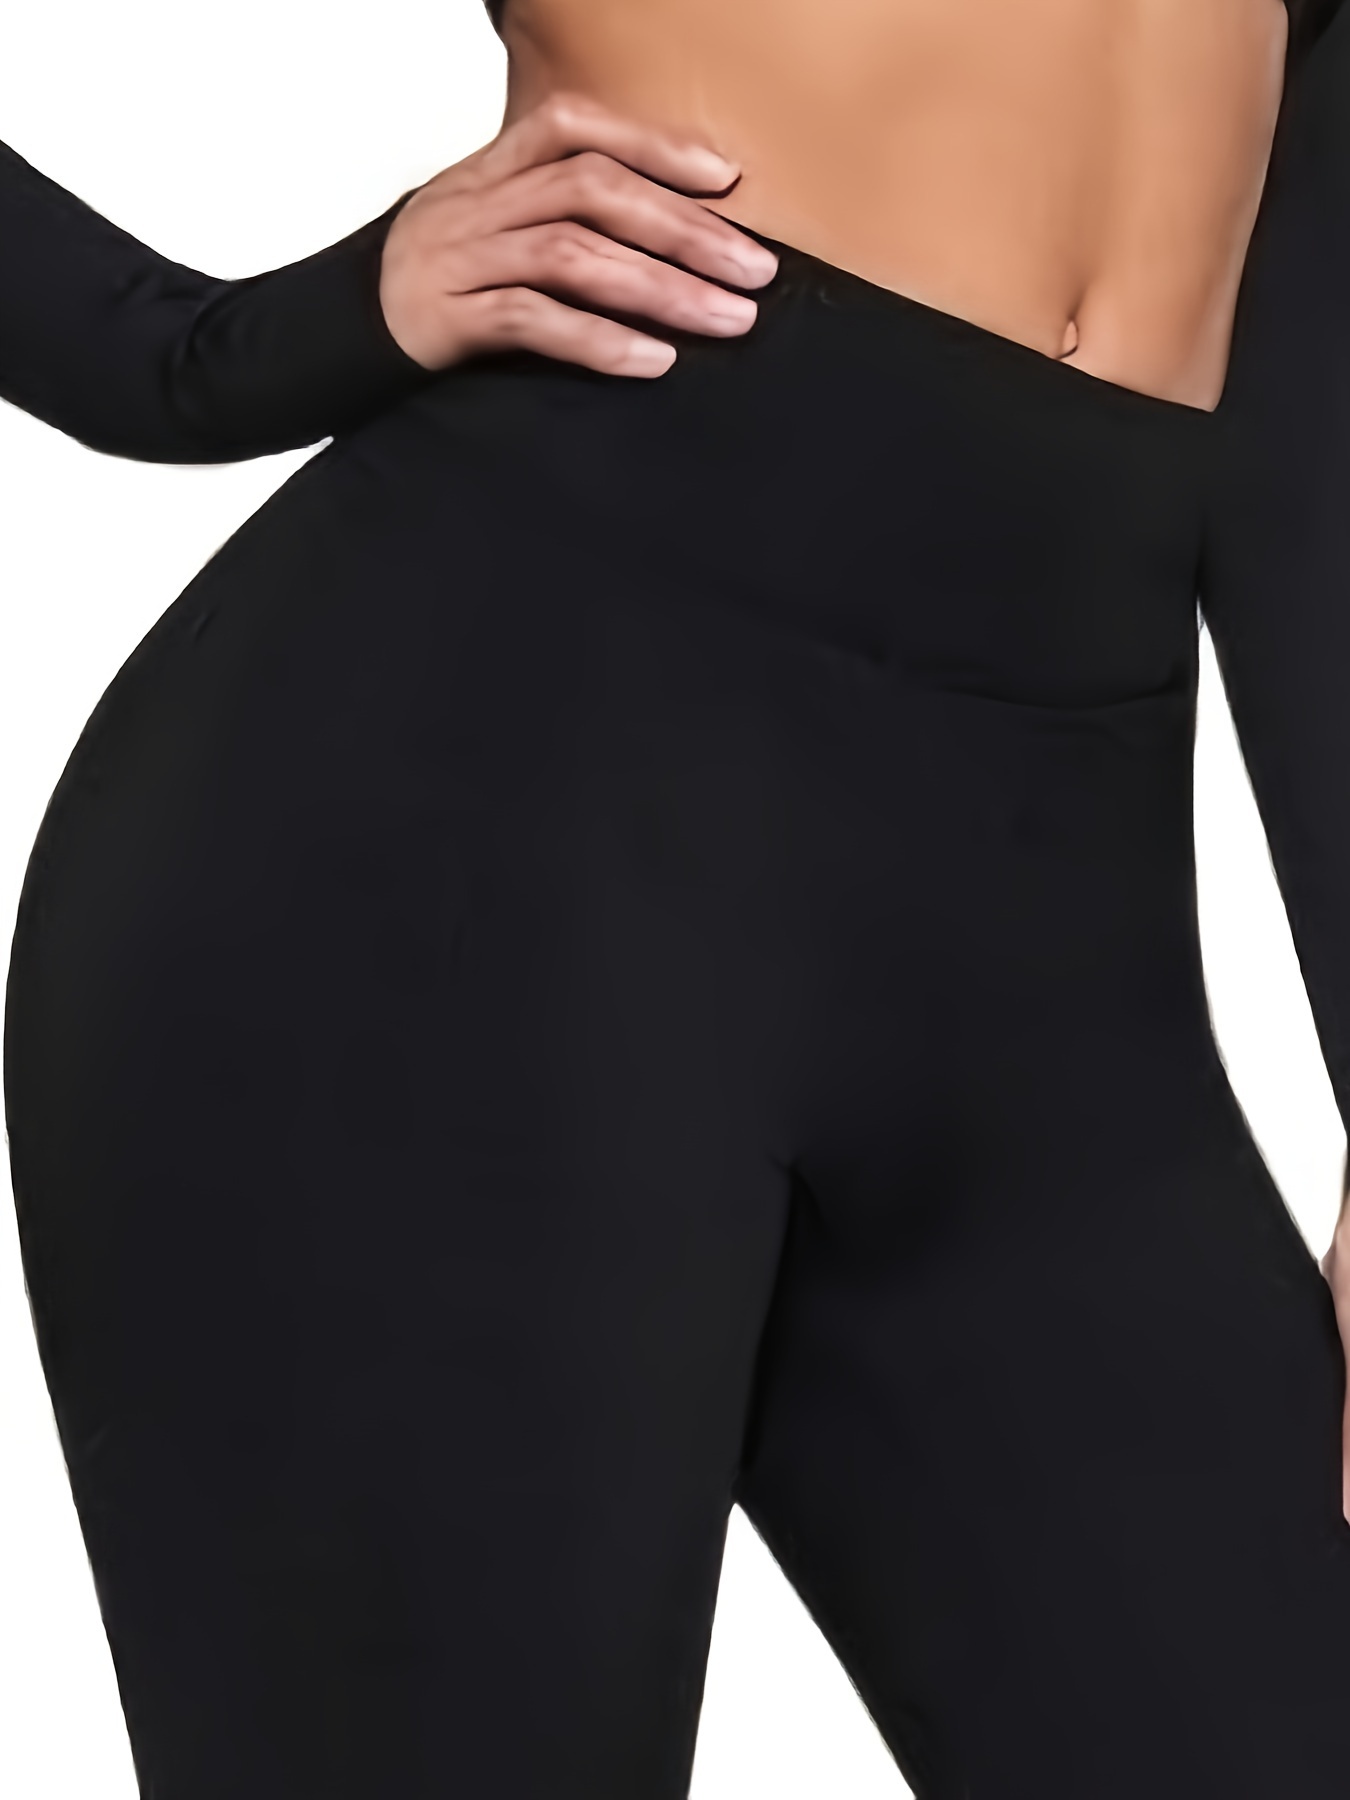 Stretchy Spandex Flared Leggings for Women High Waist Casual